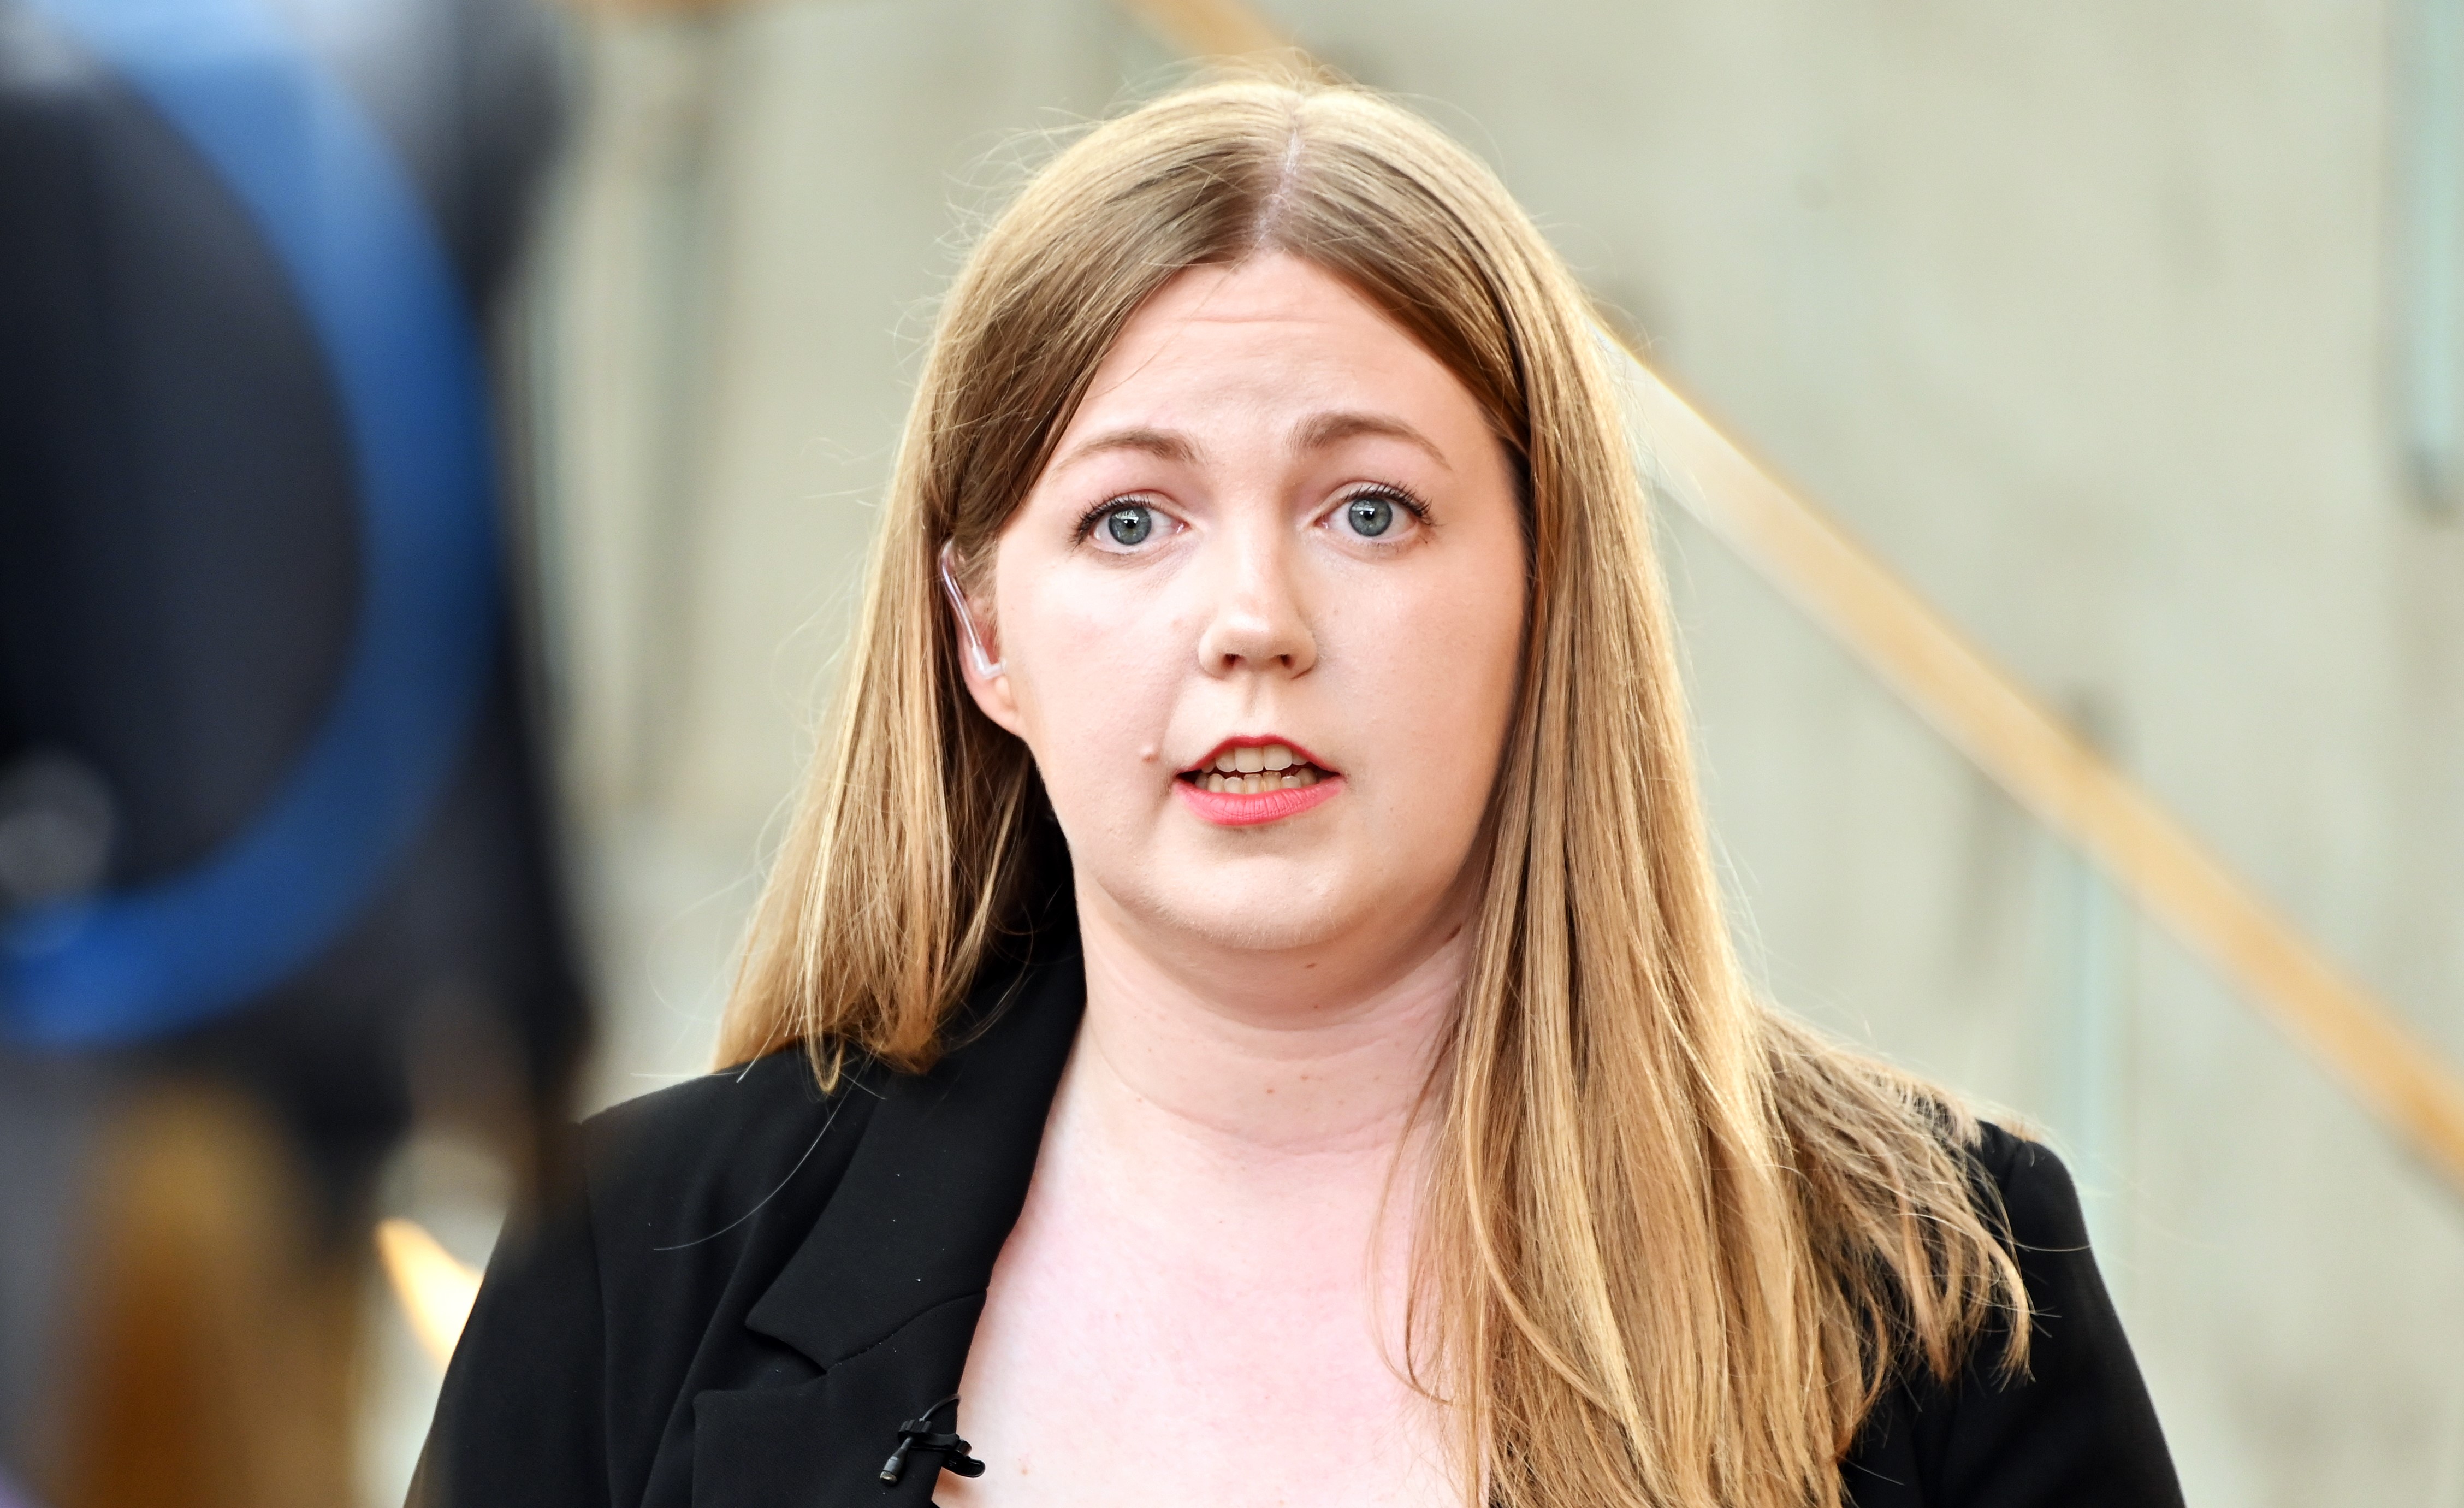 Green MSP Gillian Mackay spoke ahead of giving evidence at a committee on Tuesday.